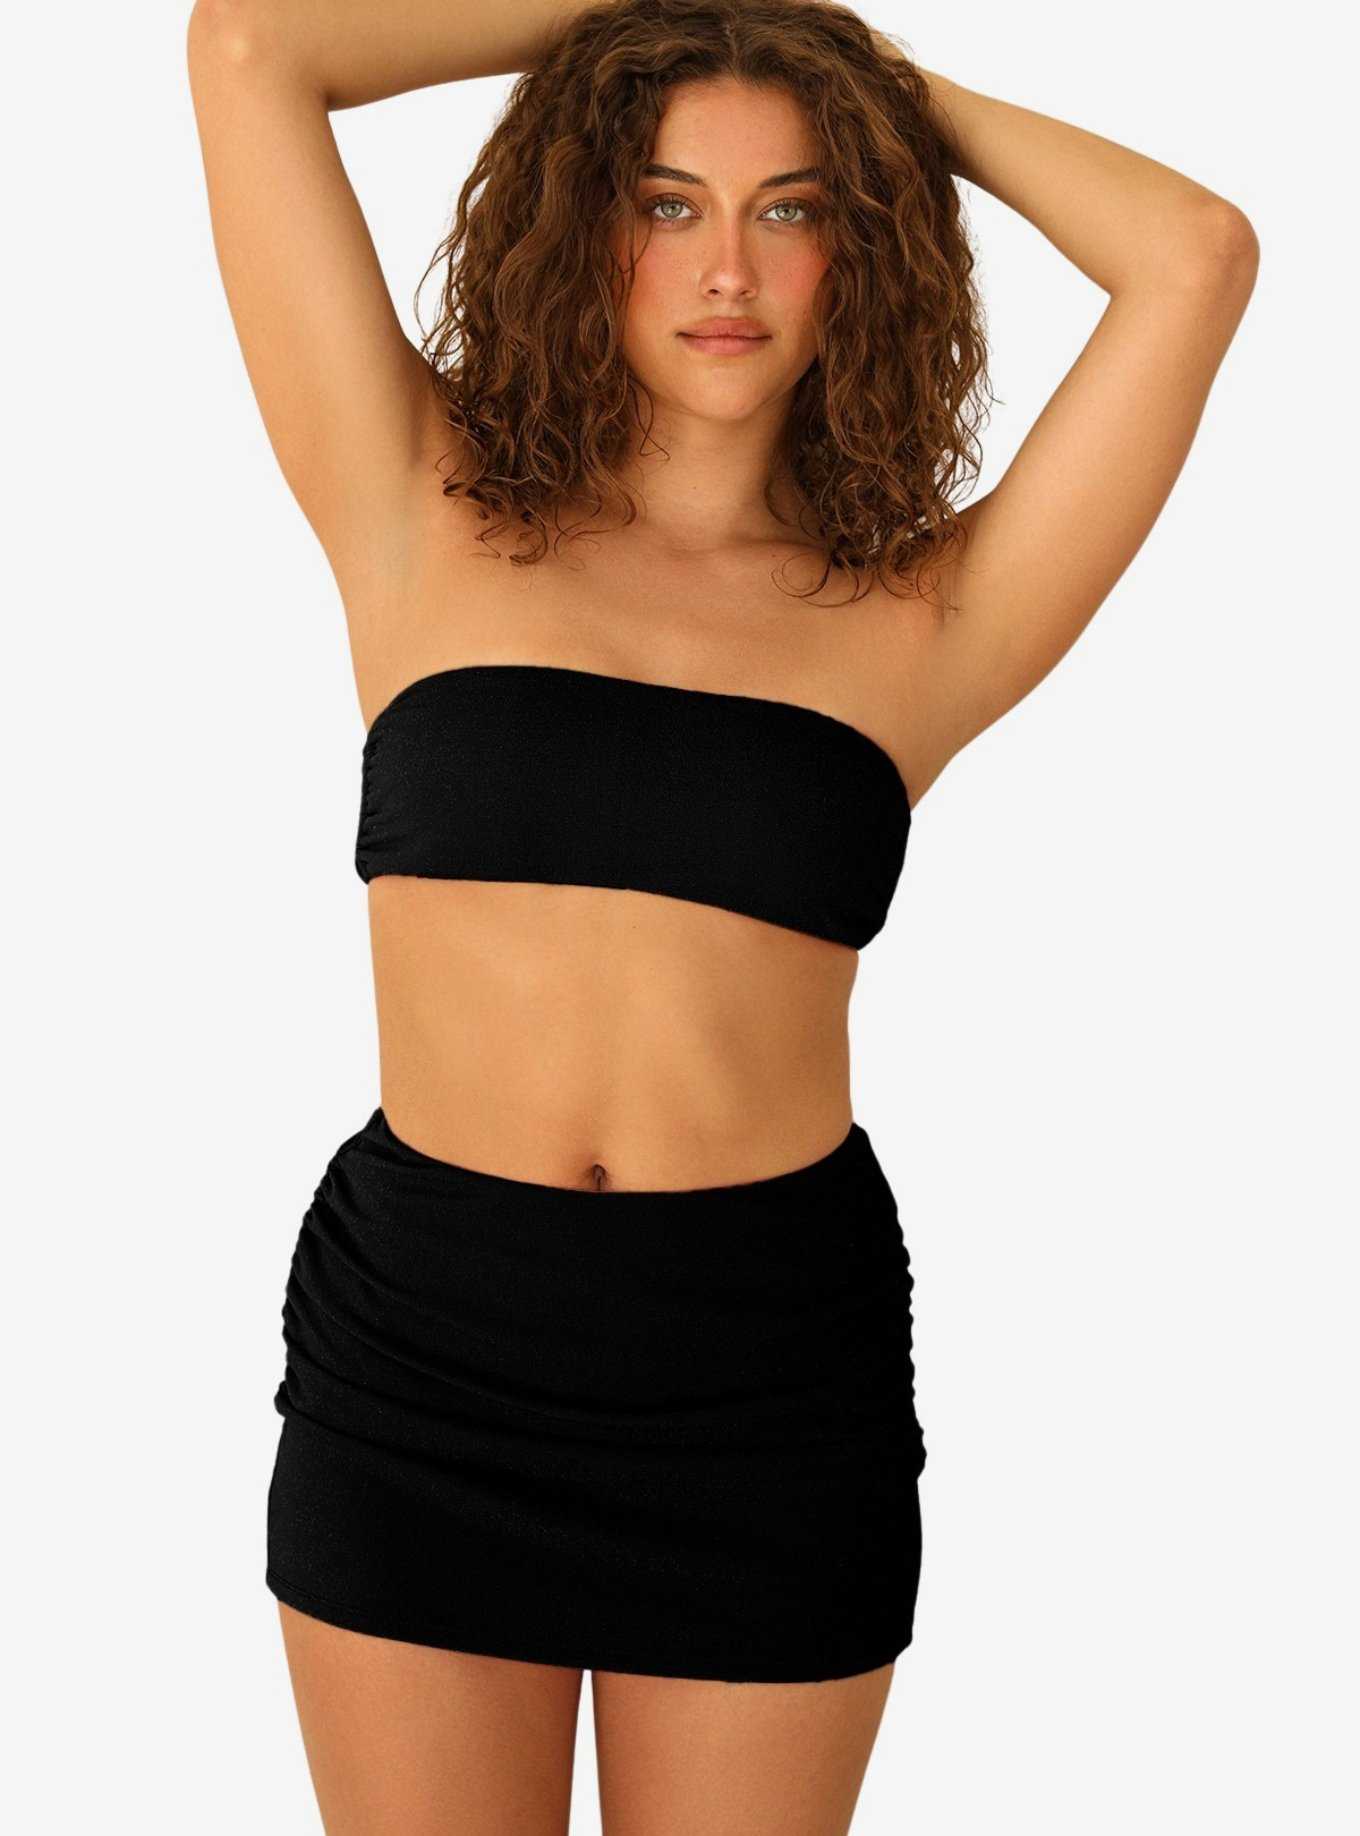 Dippin' Daisy's Lucky Swim Skirt Cover-Up Black, , hi-res